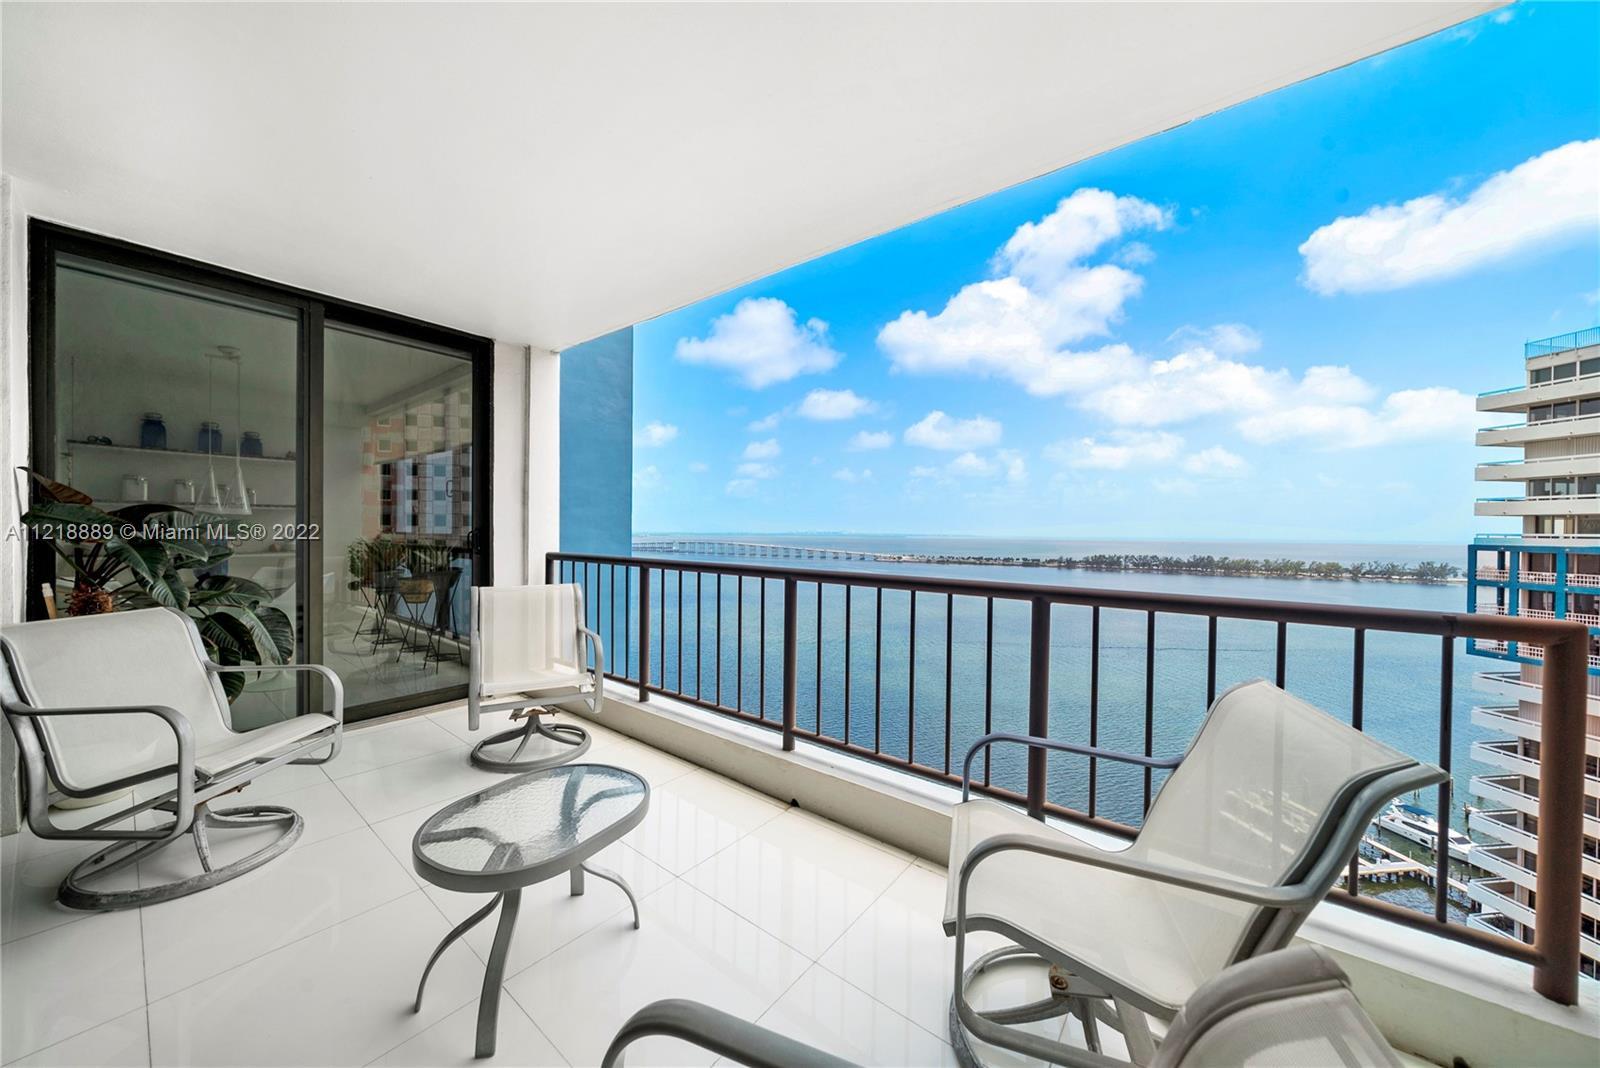 Beautiful residence at Villa Regina in Brickell, with only 3 units per floor and amazing views of Mi